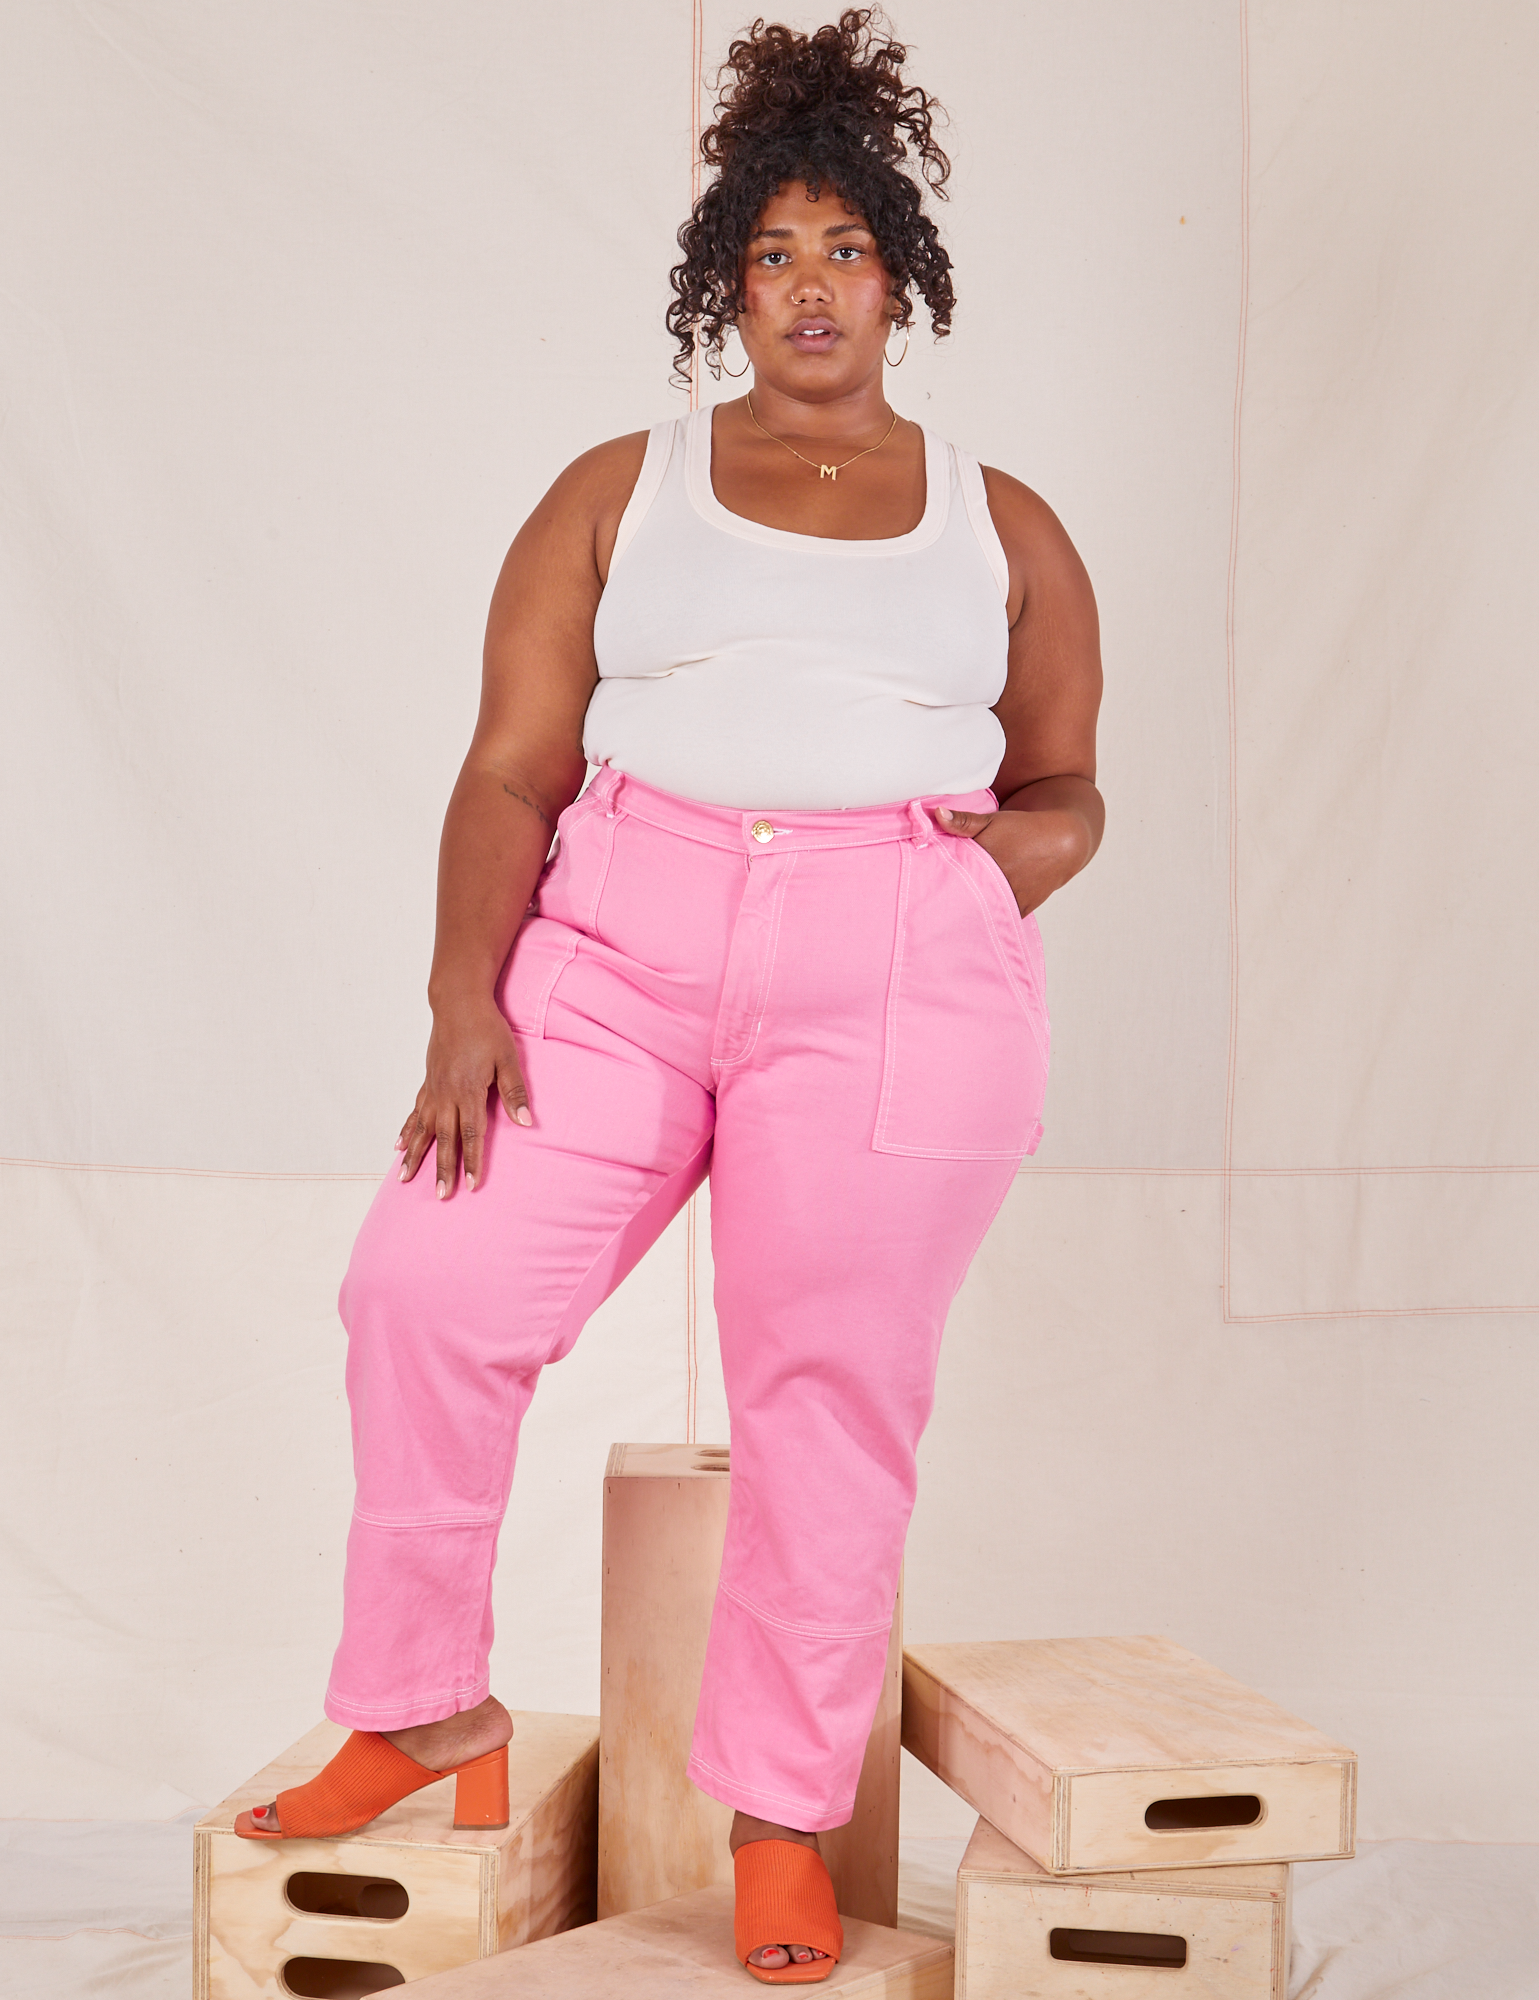 Morgan is wearing Carpenter Jeans in Bubblegum Pink and vintage off-white Tank Top